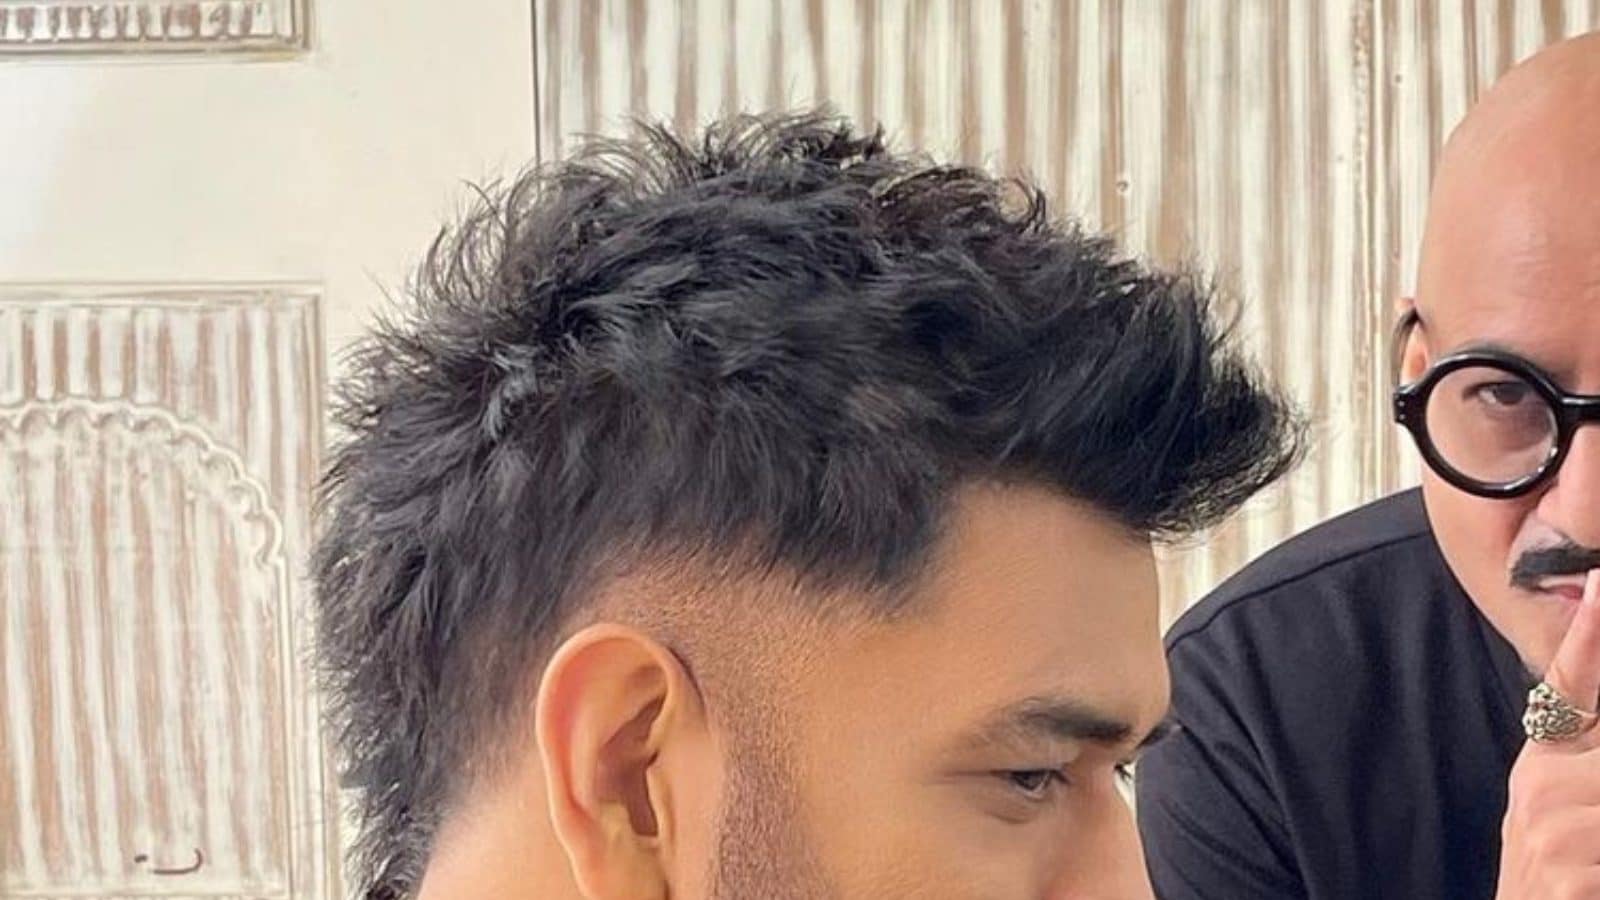 Dhoni's new hairstyle a rage among fans